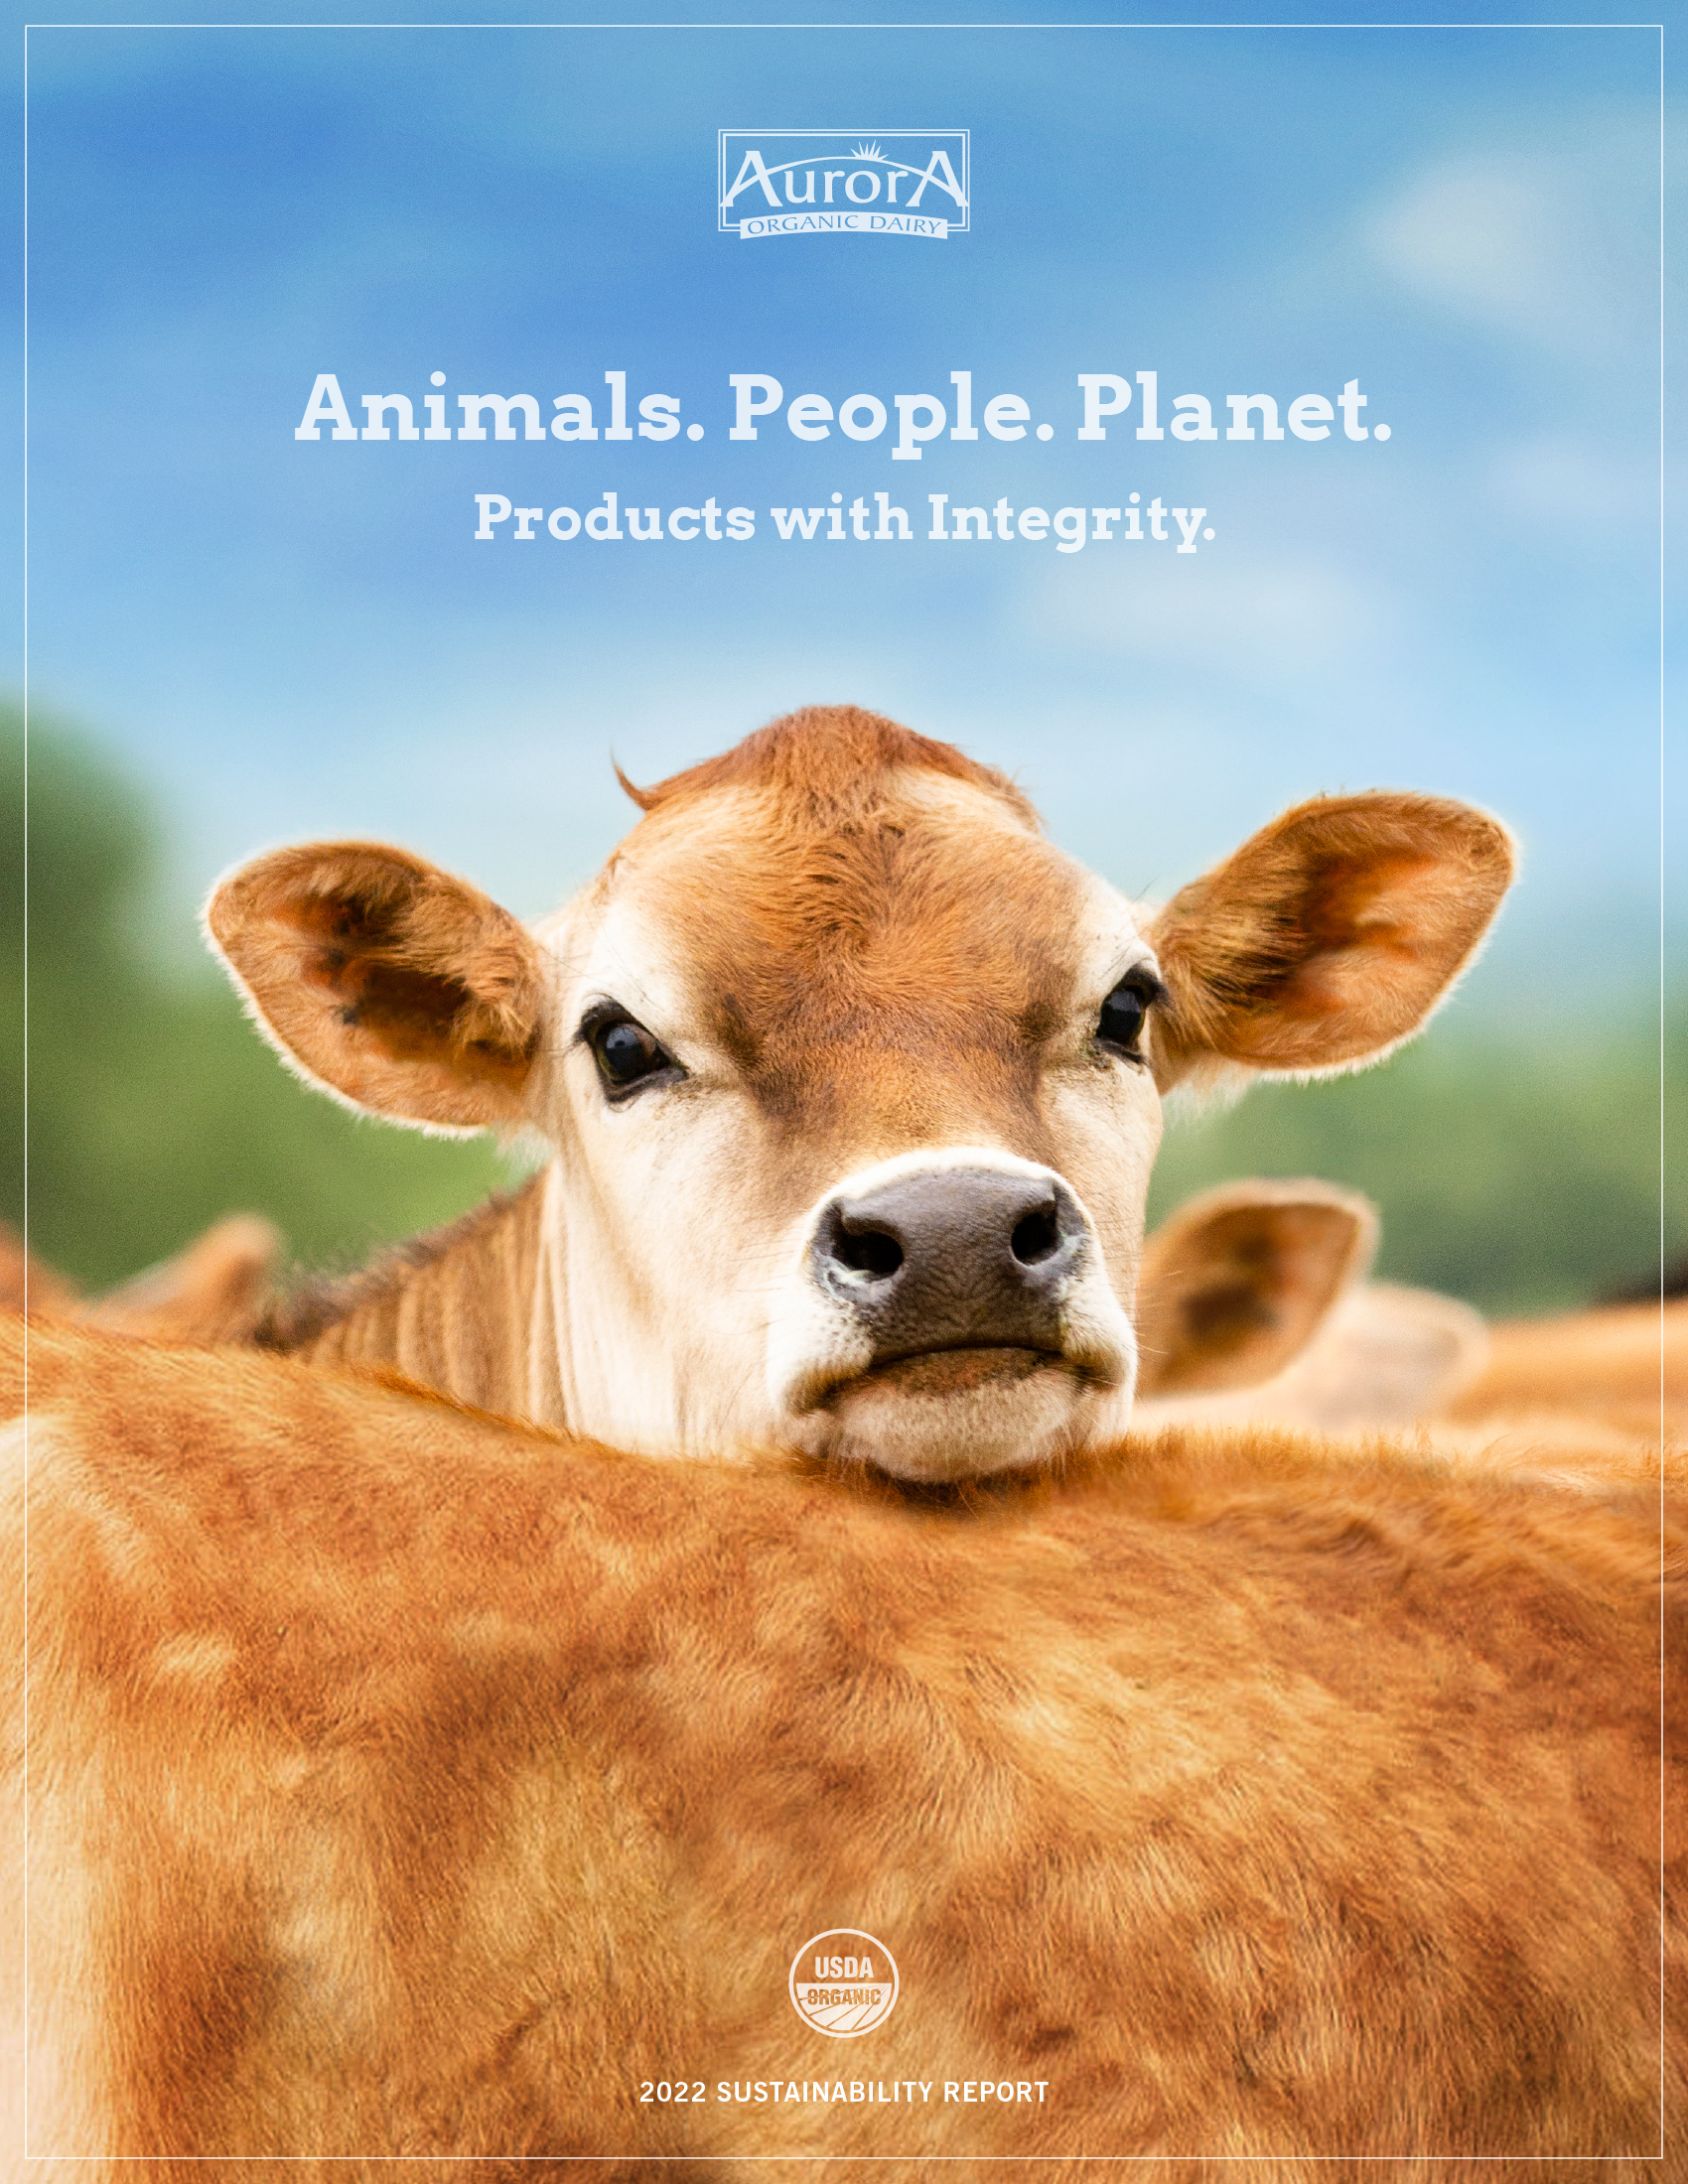 CSRWire - Aurora Organic Dairy Demonstrates Progress Towards Its Animals,  People and Planet Goals in Its 2022 Sustainability Report